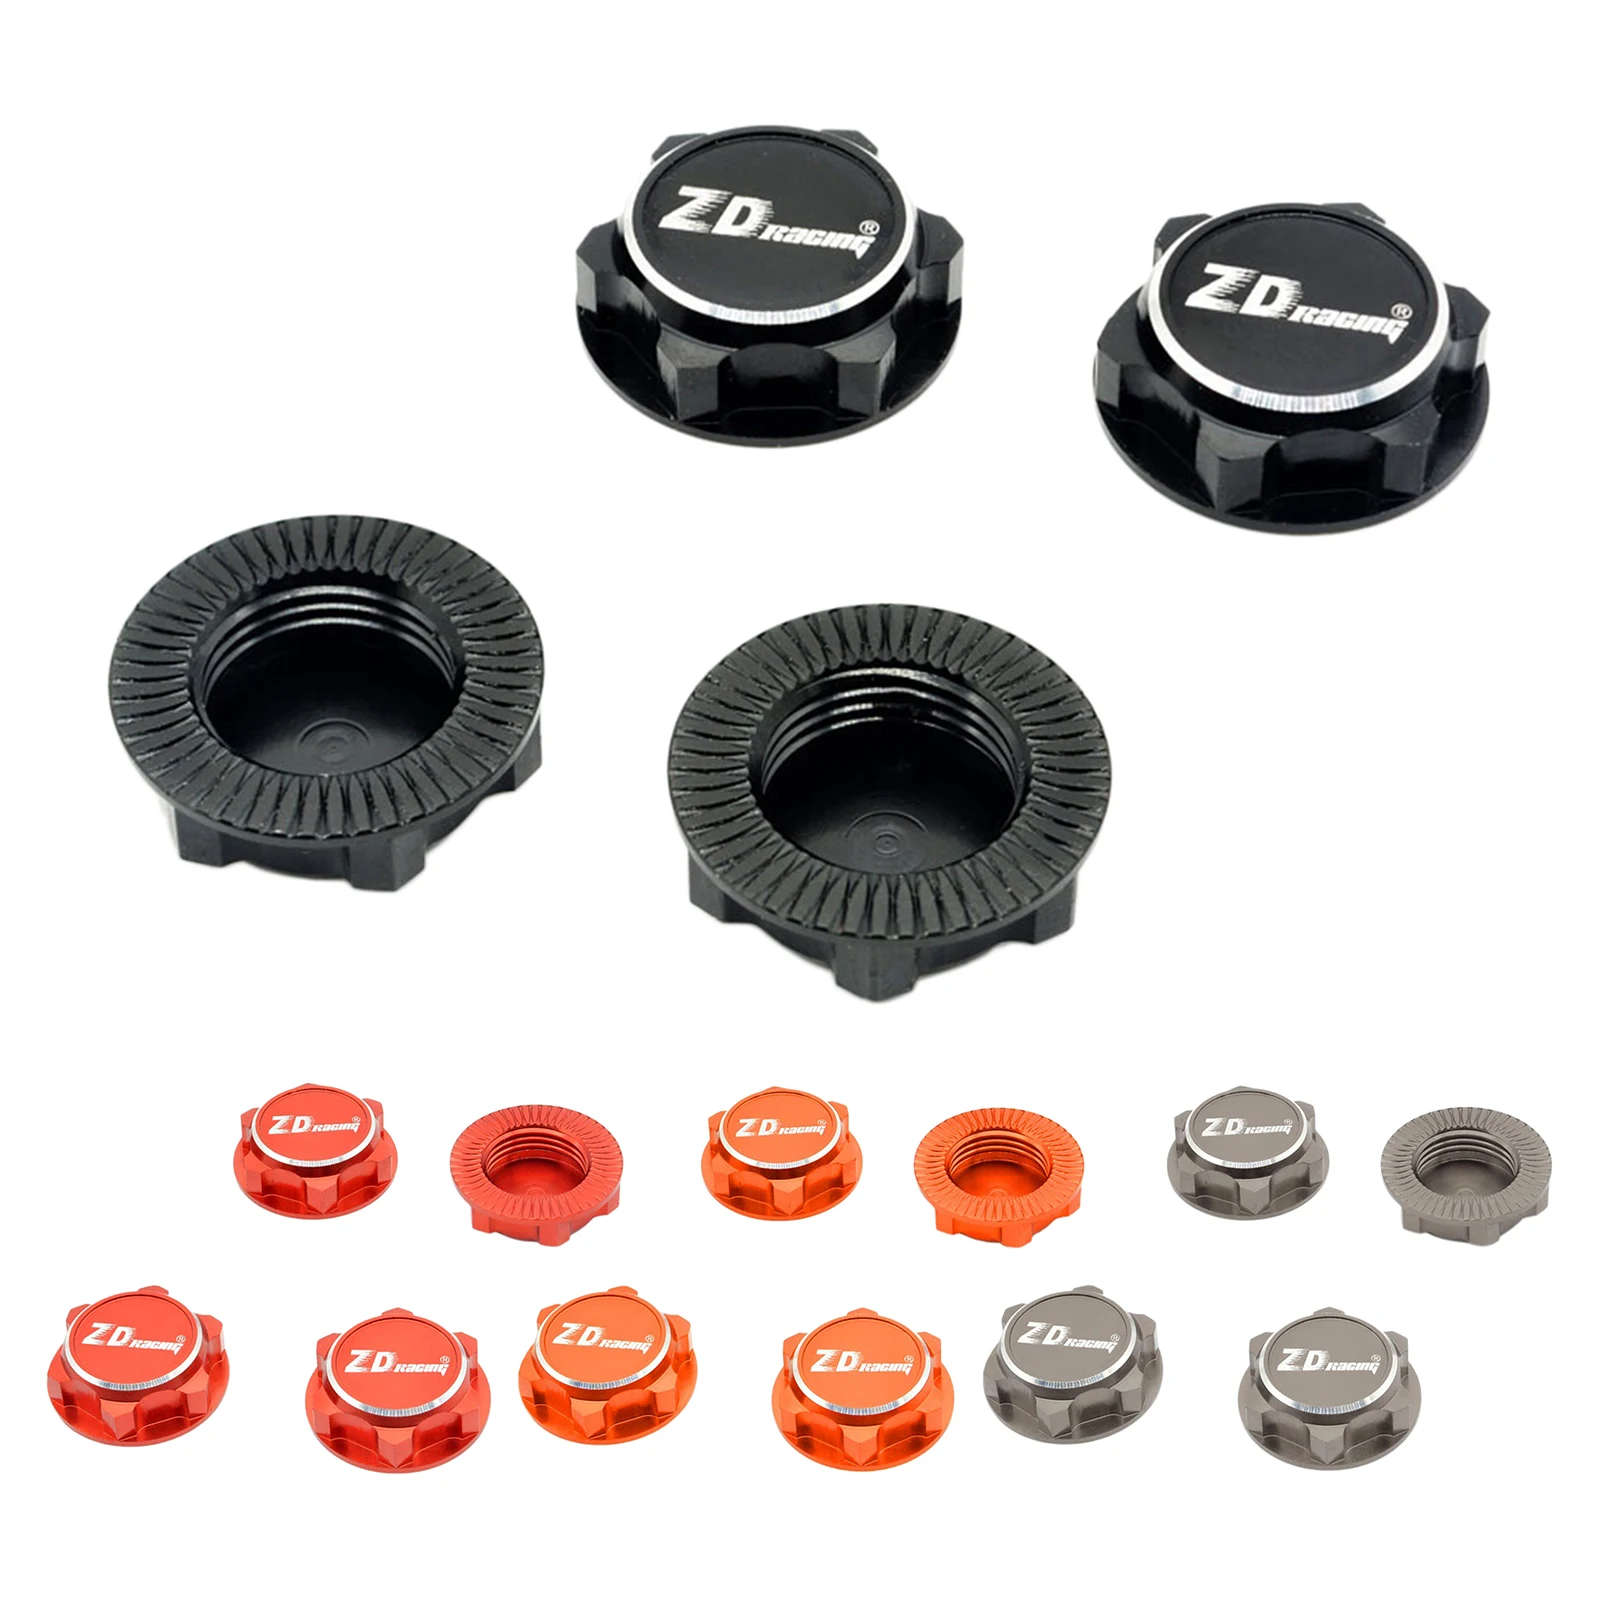 4x17mm Hex Wheel Nuts Set, Dustproof Mount , for 1/8 Scale RC Car Off-Road Car Climbing Car Replacement